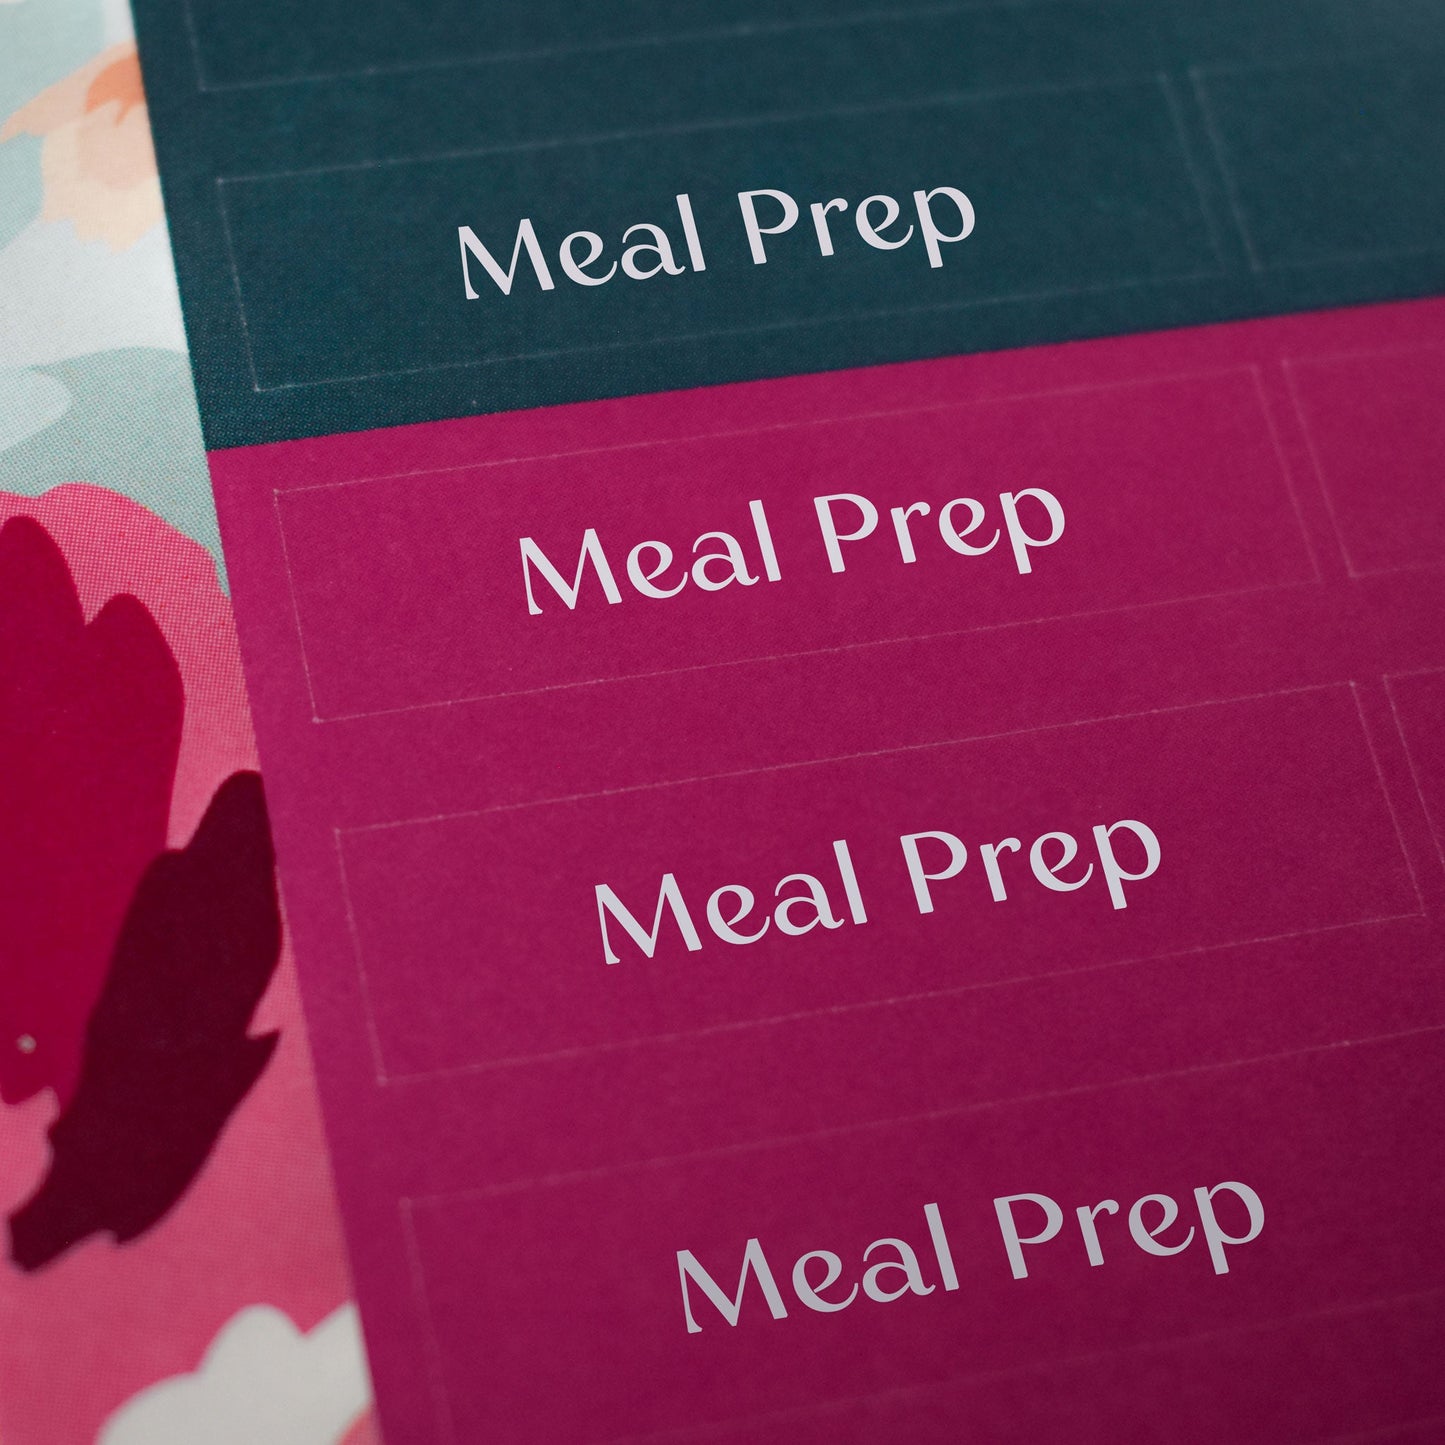 Meal Prep Sticker Sheets - "Meal Prep" (2 Sheets) - Colibri Paper Co